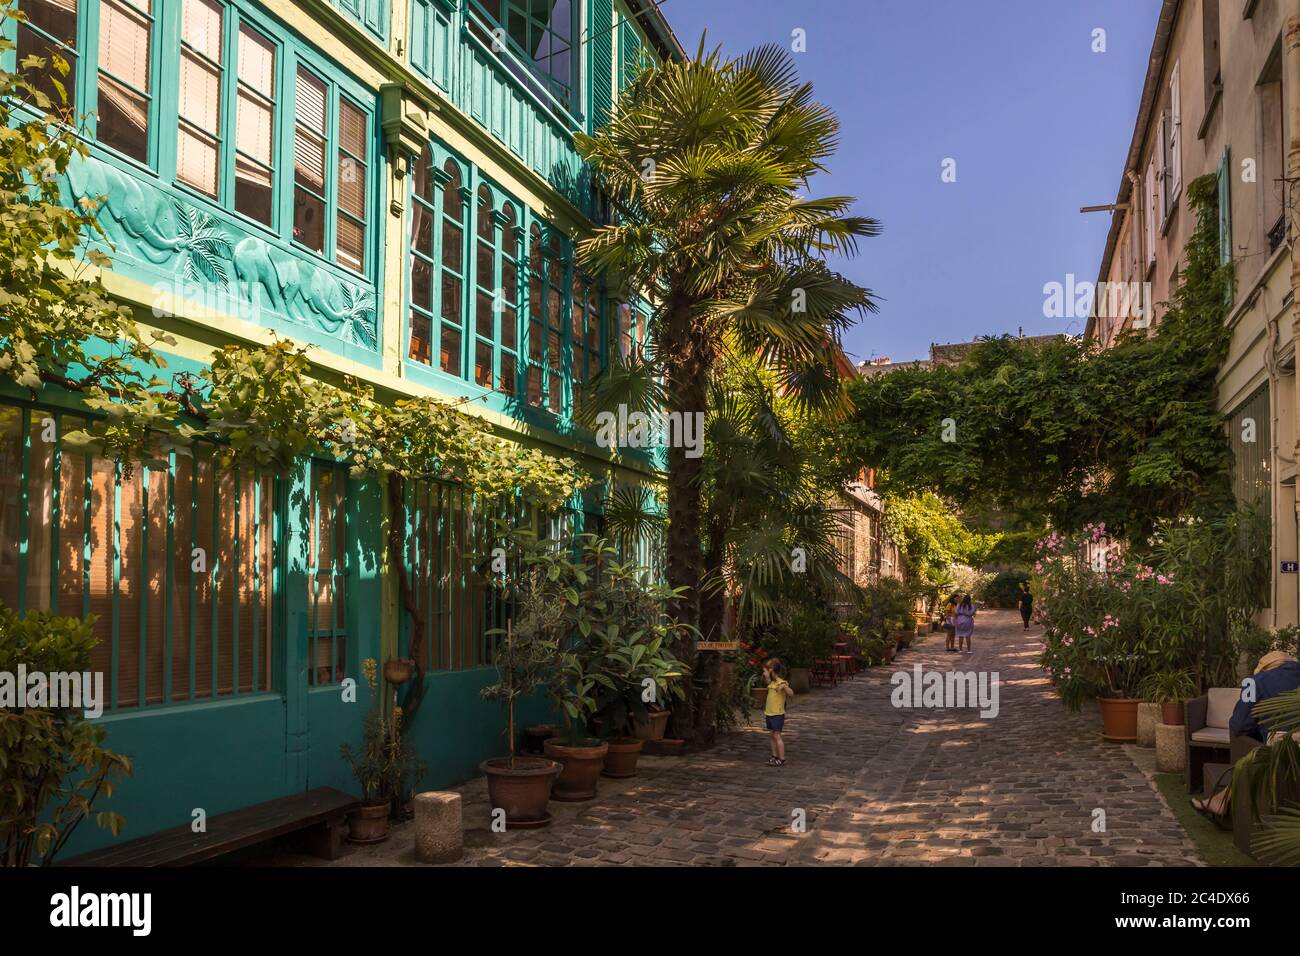 Paris, France - June 24, 2020: The Figuier street with its vegetation in Paris 11th district Stock Photo